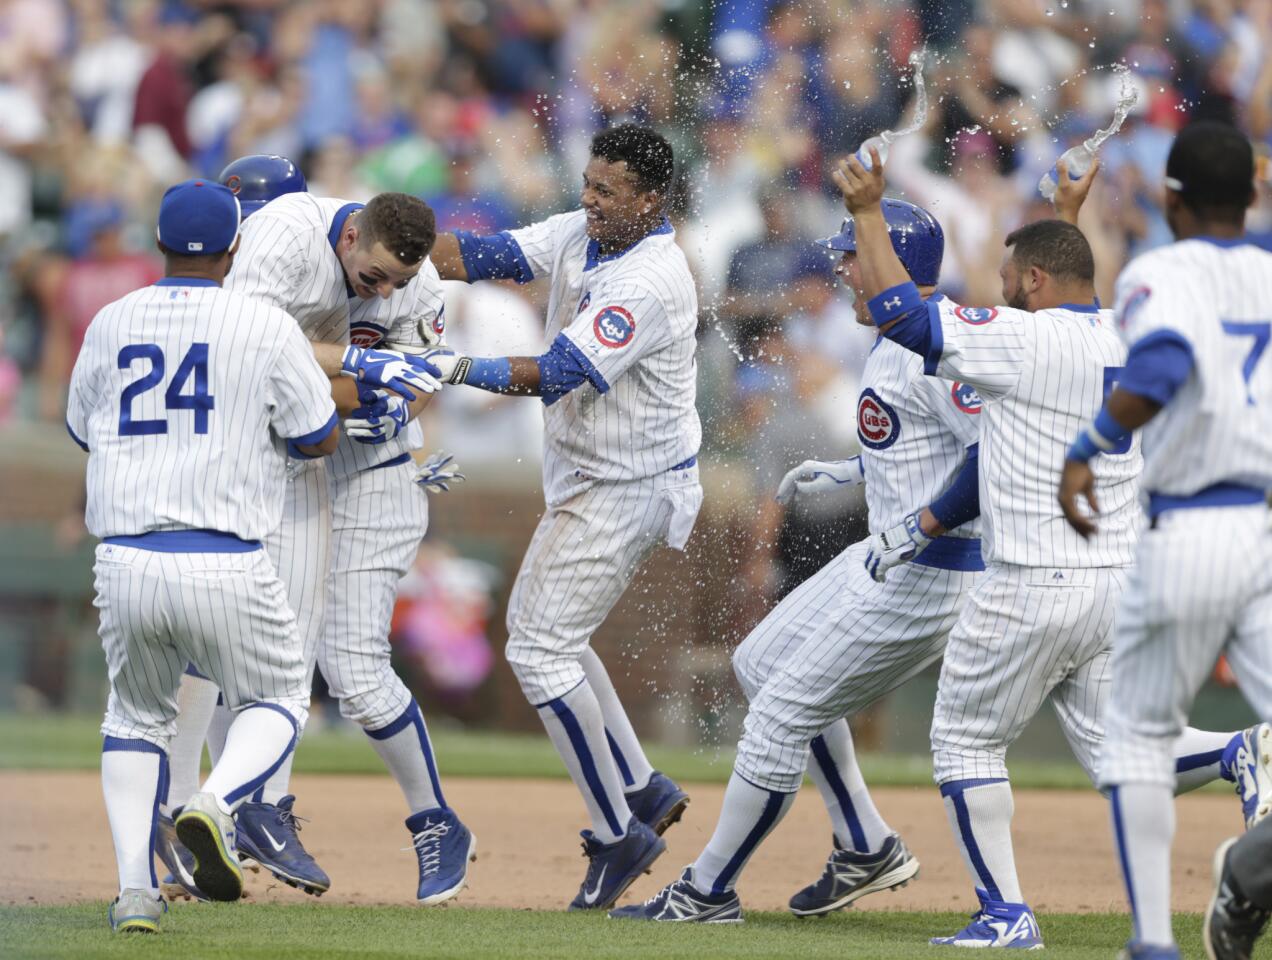 Anthony Rizzo is swarmed by his teammates after hitting the game-winning hit in the 12th inning.